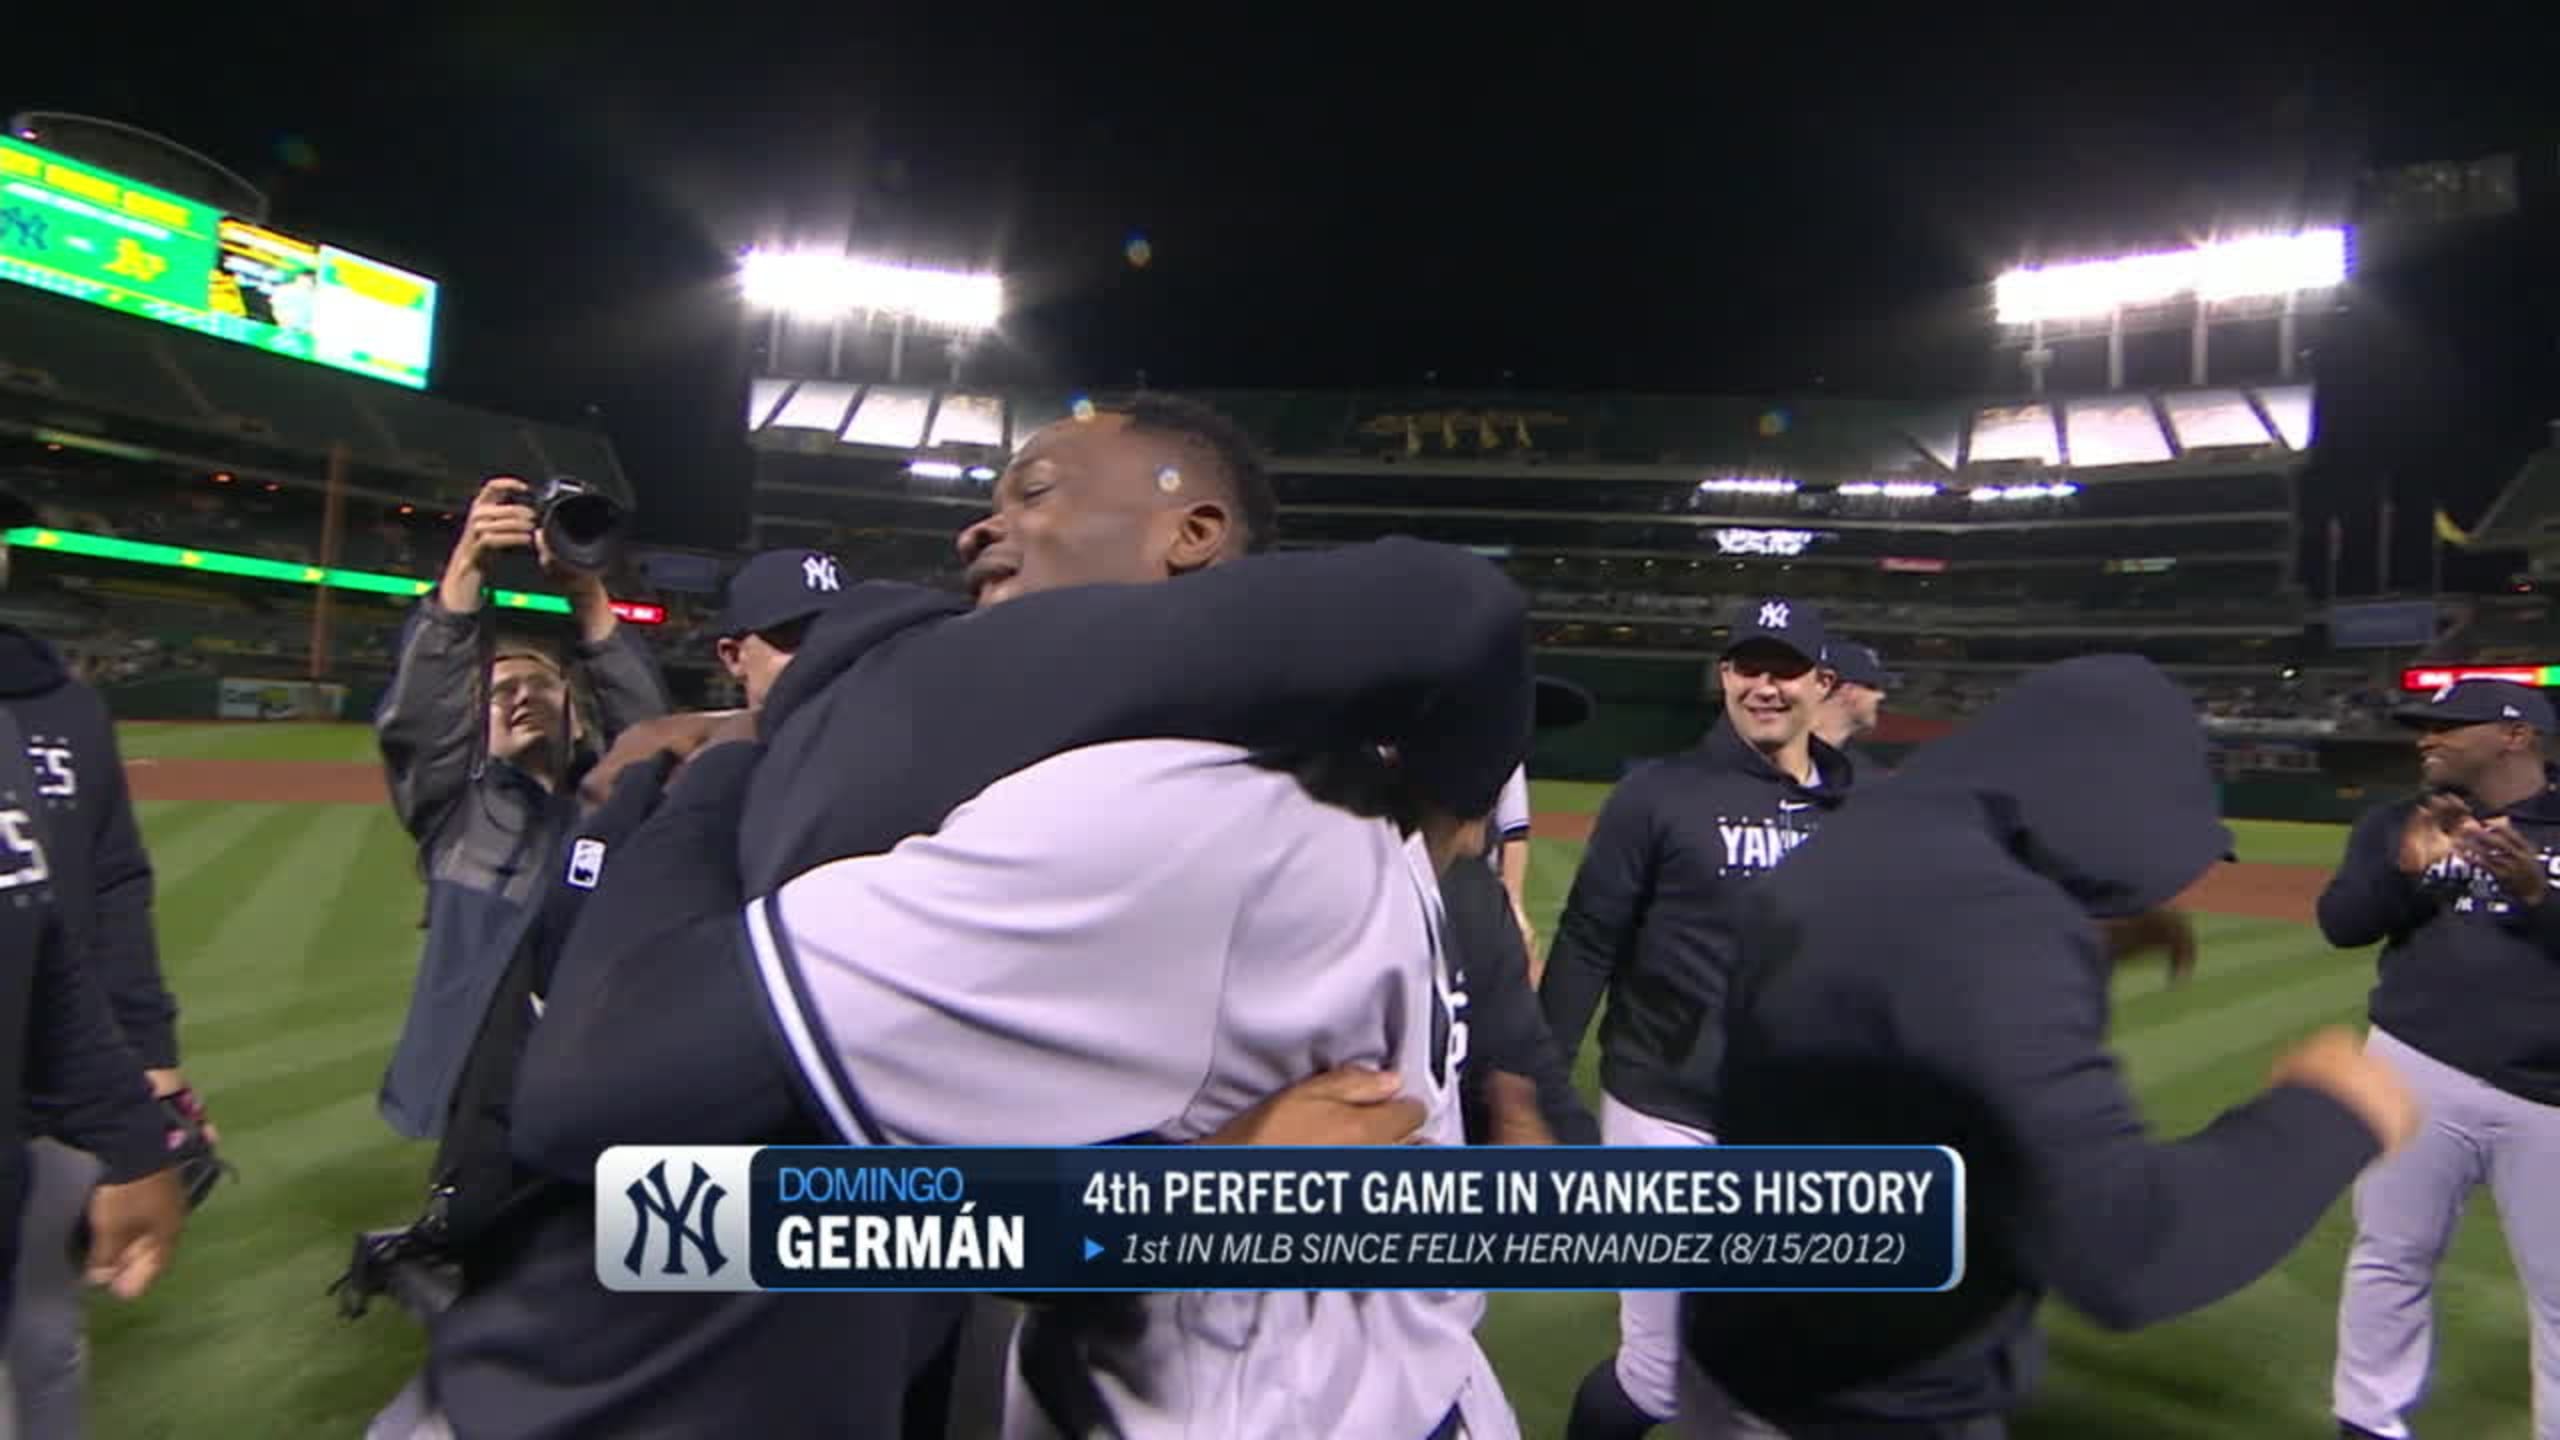 Yankees pitcher throws a perfect game, just the 24th in MLB